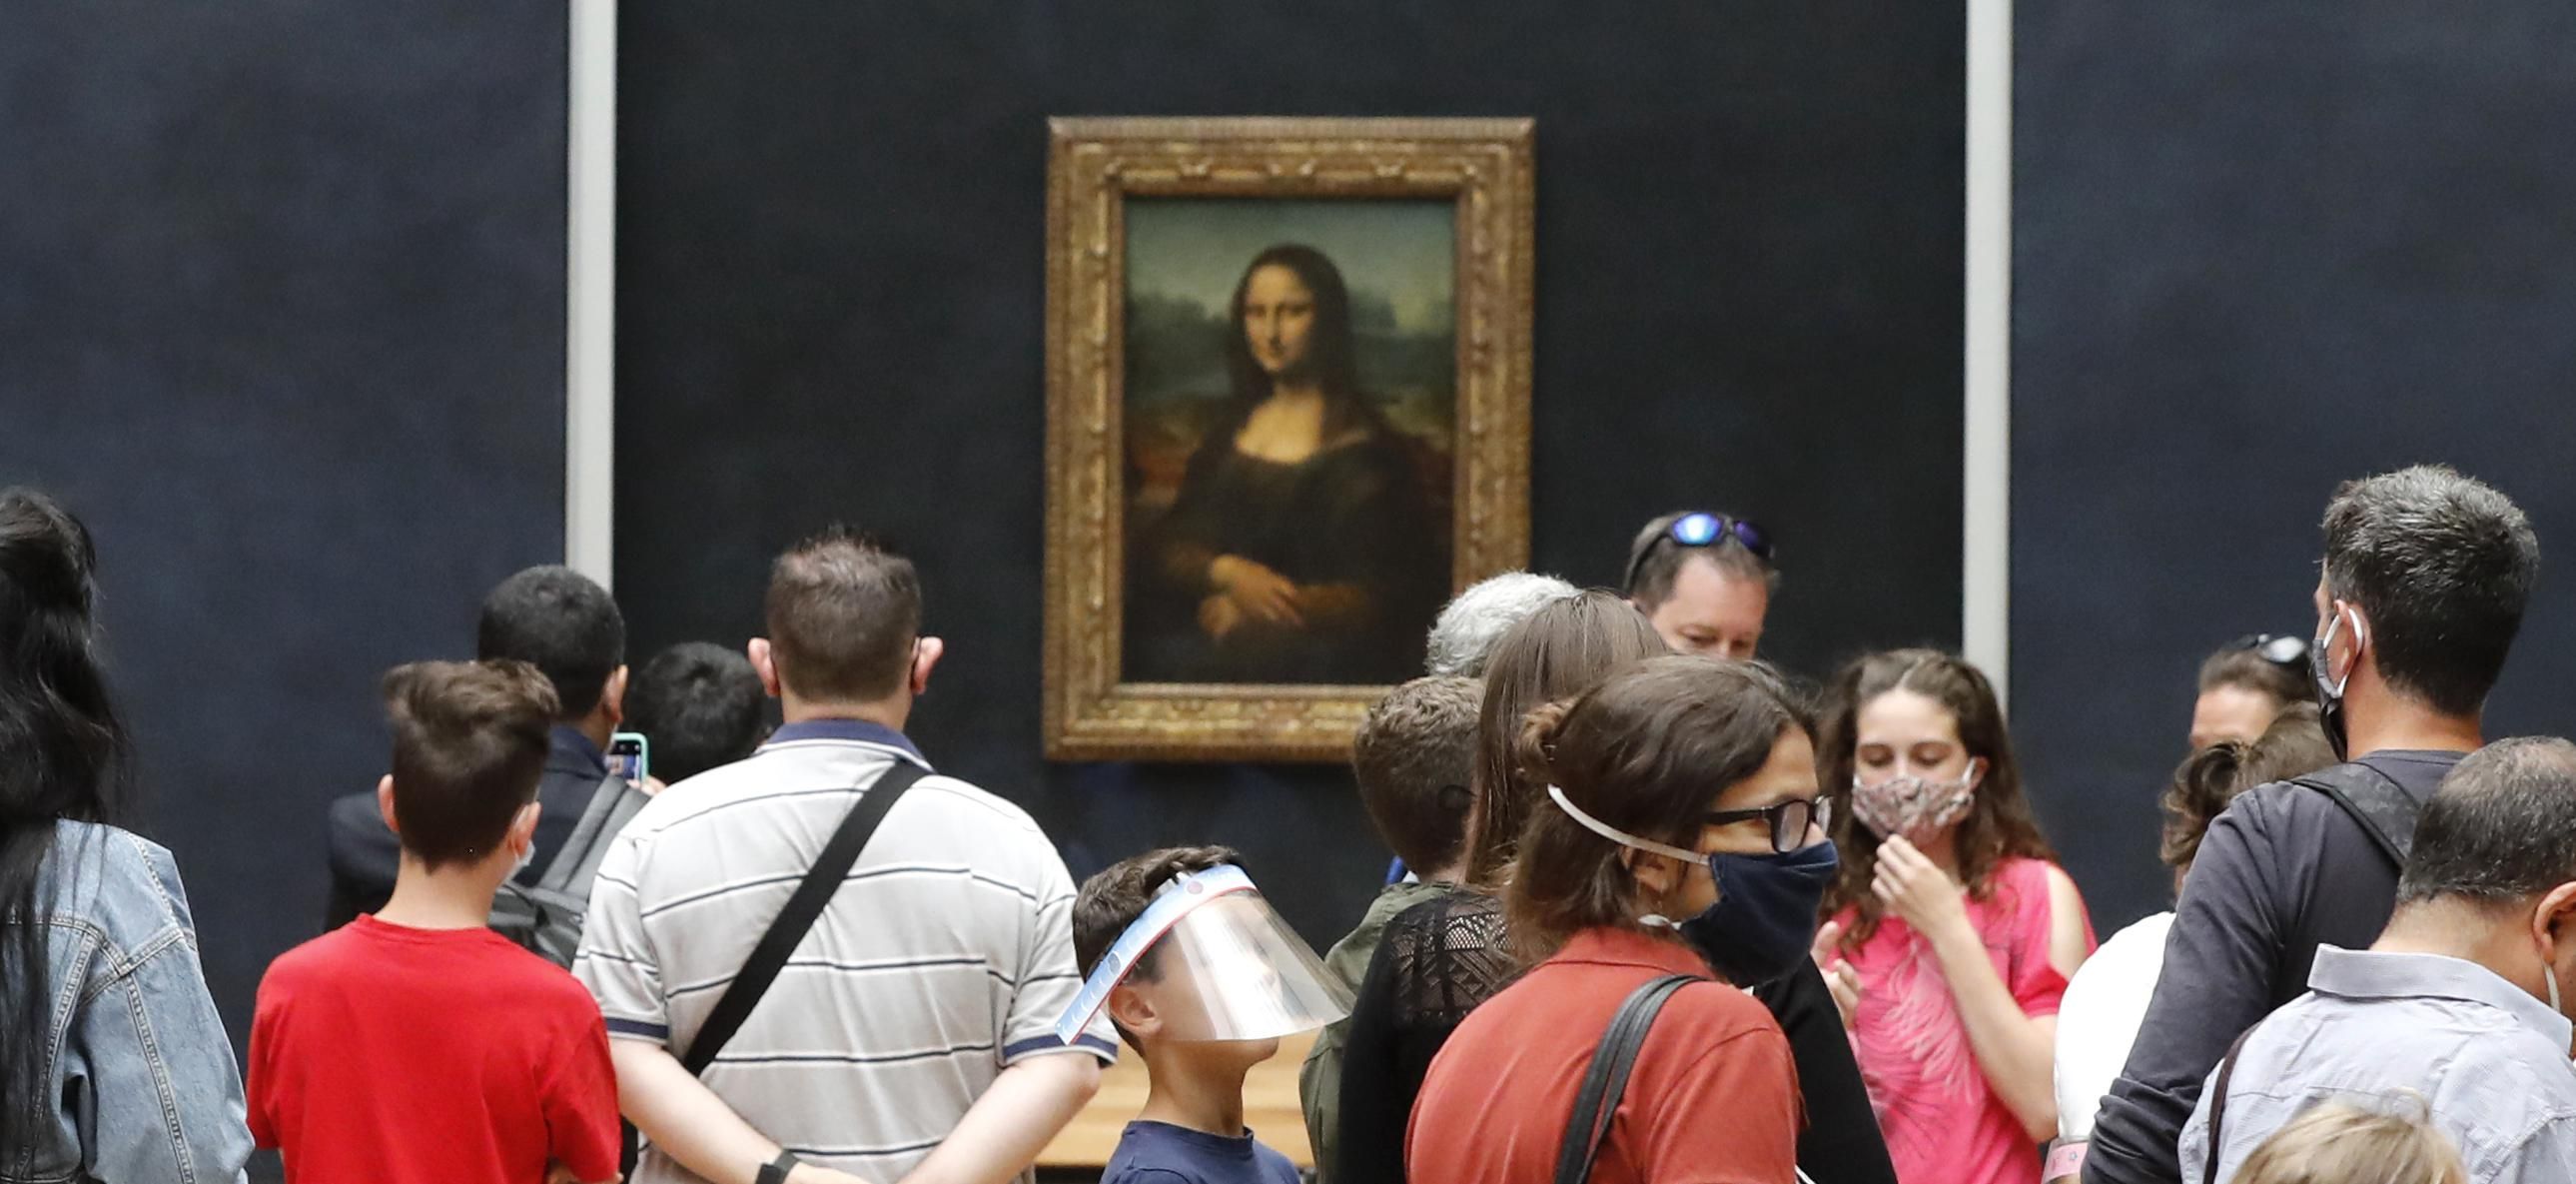 Video: Mona Lisa smeared with cake by climate change activist | Newshub